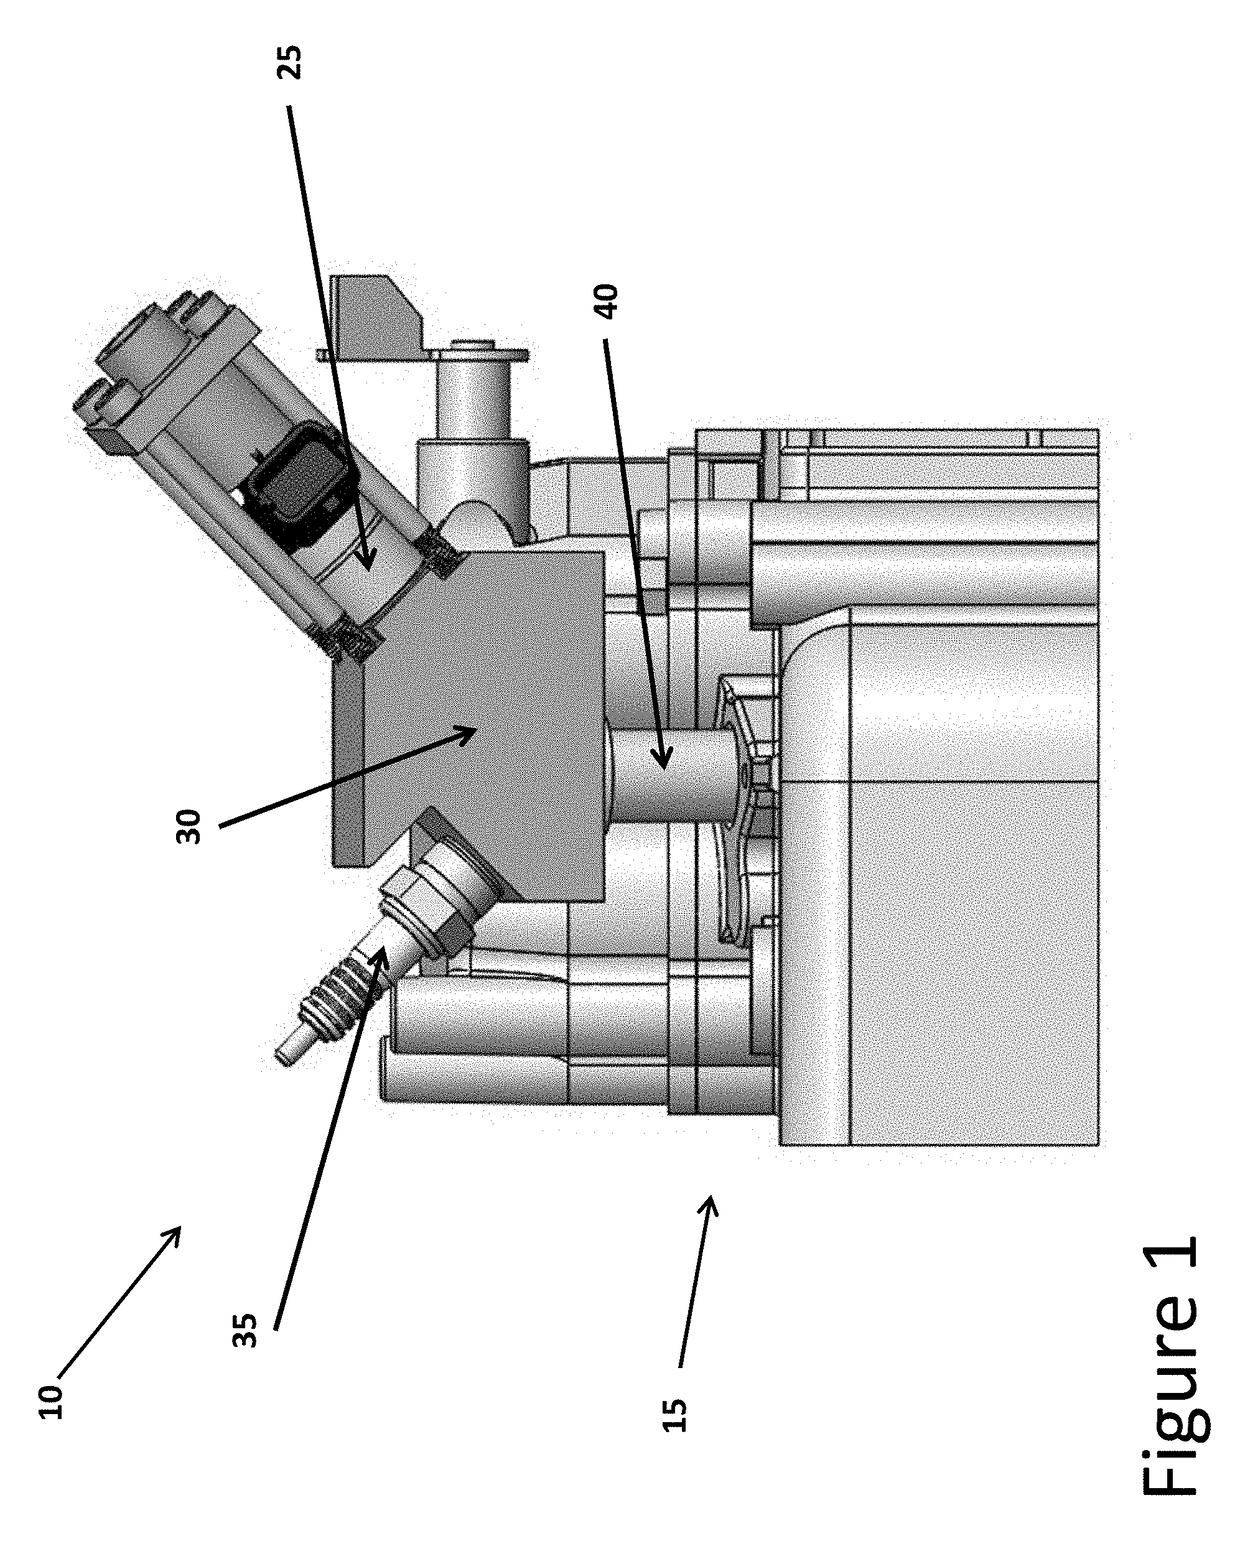 Ignition system for low grade synthesis gas at high compression